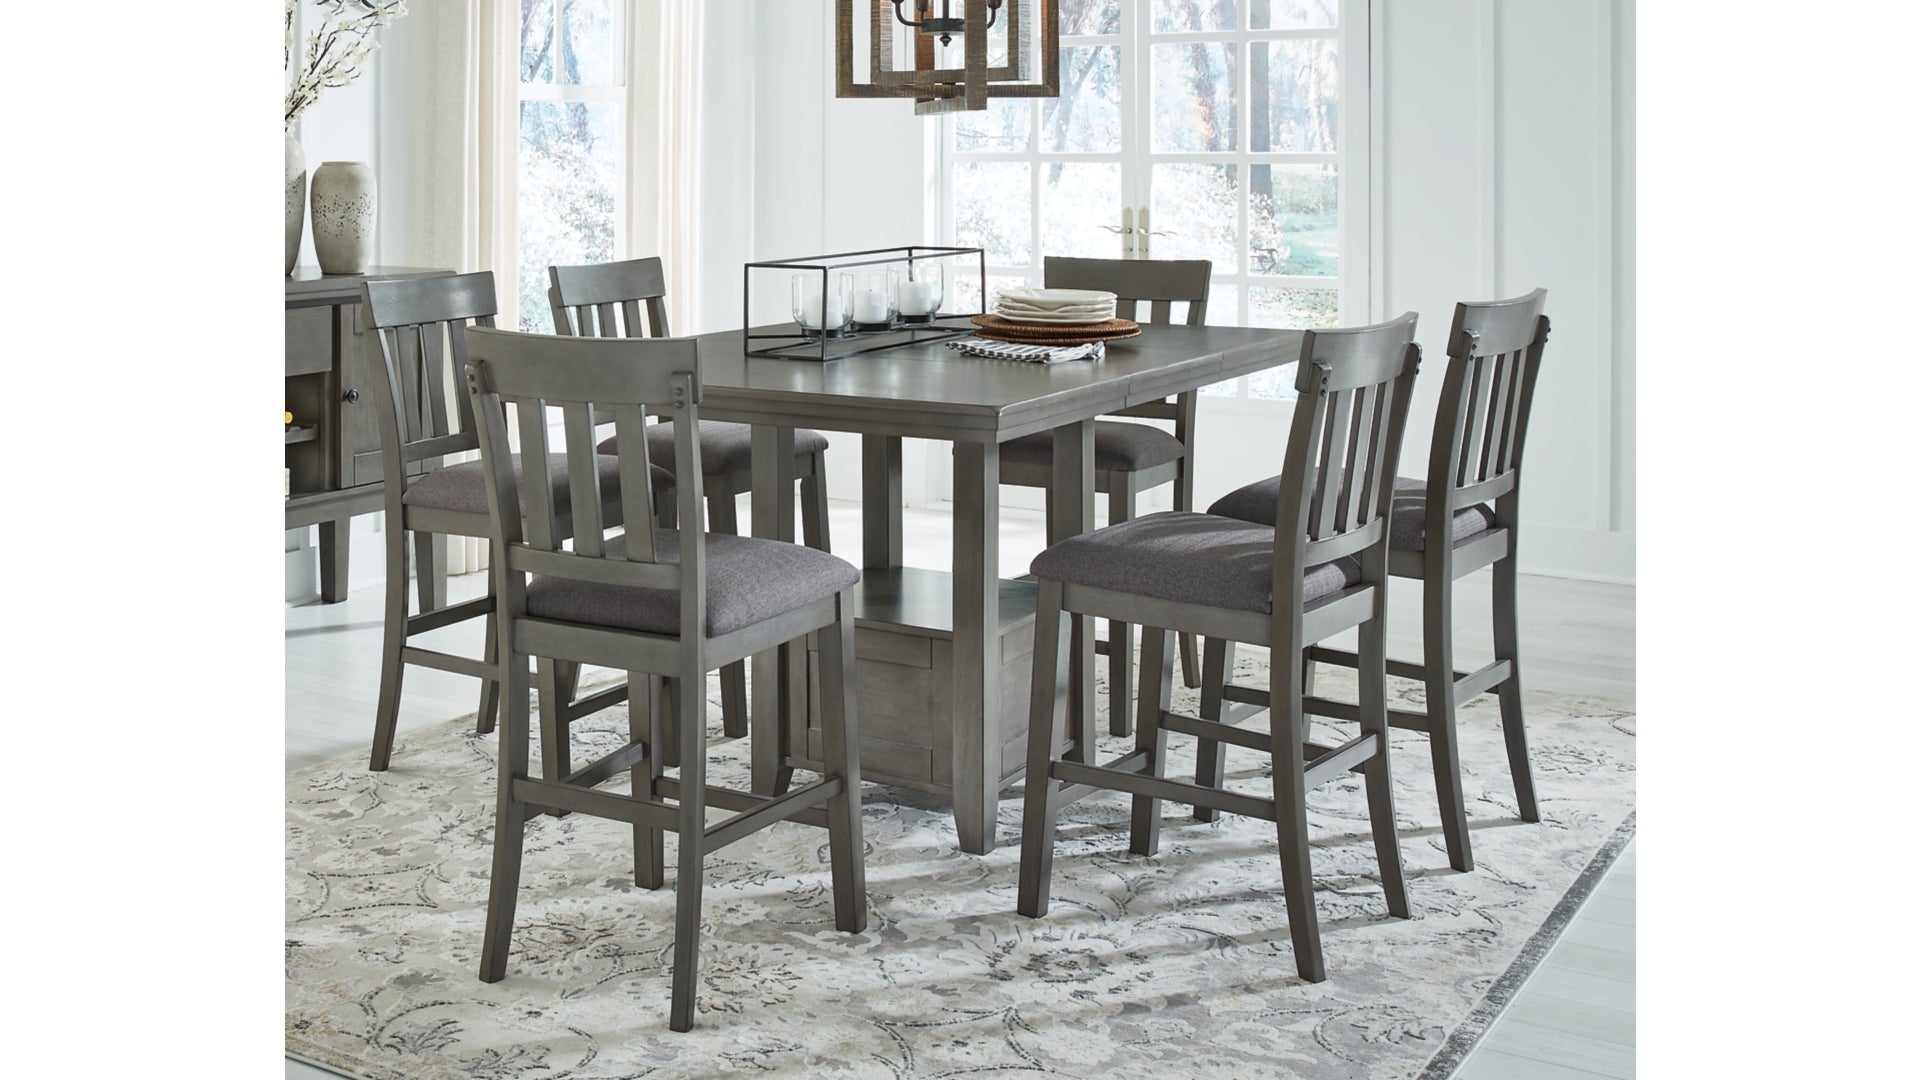 Hallanden Counter Height Dining Table and 6 Barstools